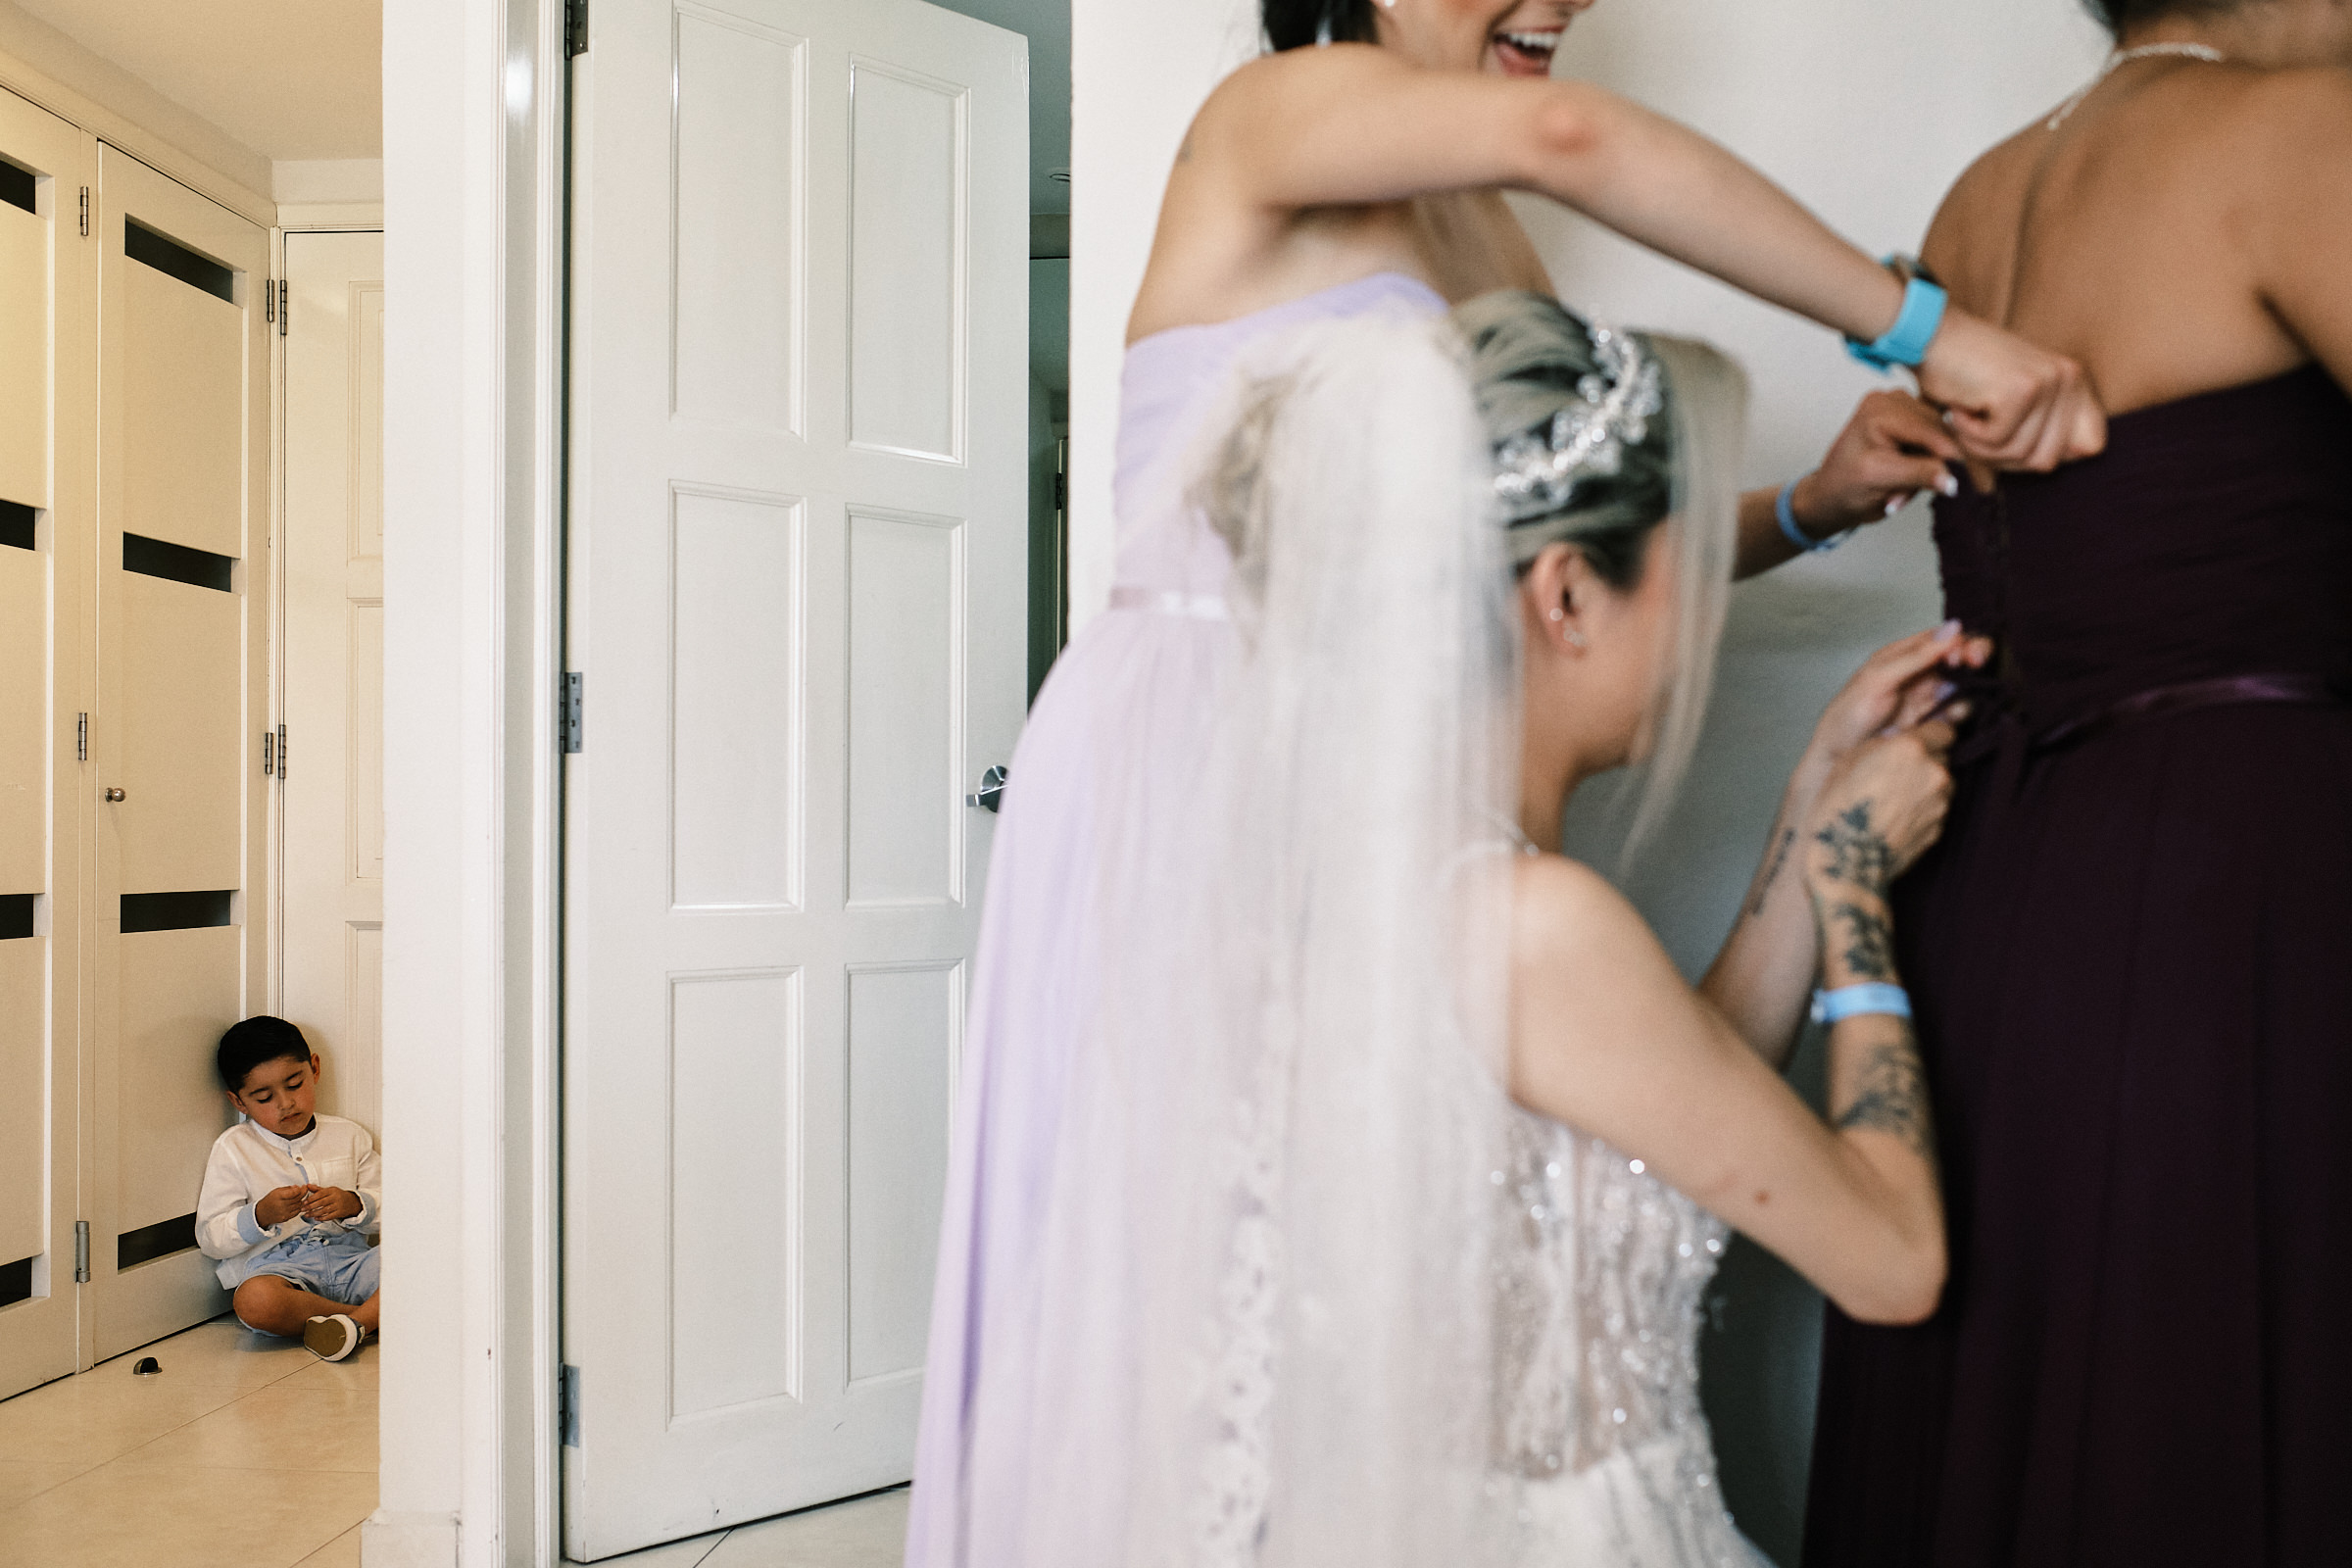 Son Of The Bride Awaits Next To Door As Mom Helps Bridesmaids Get Ready